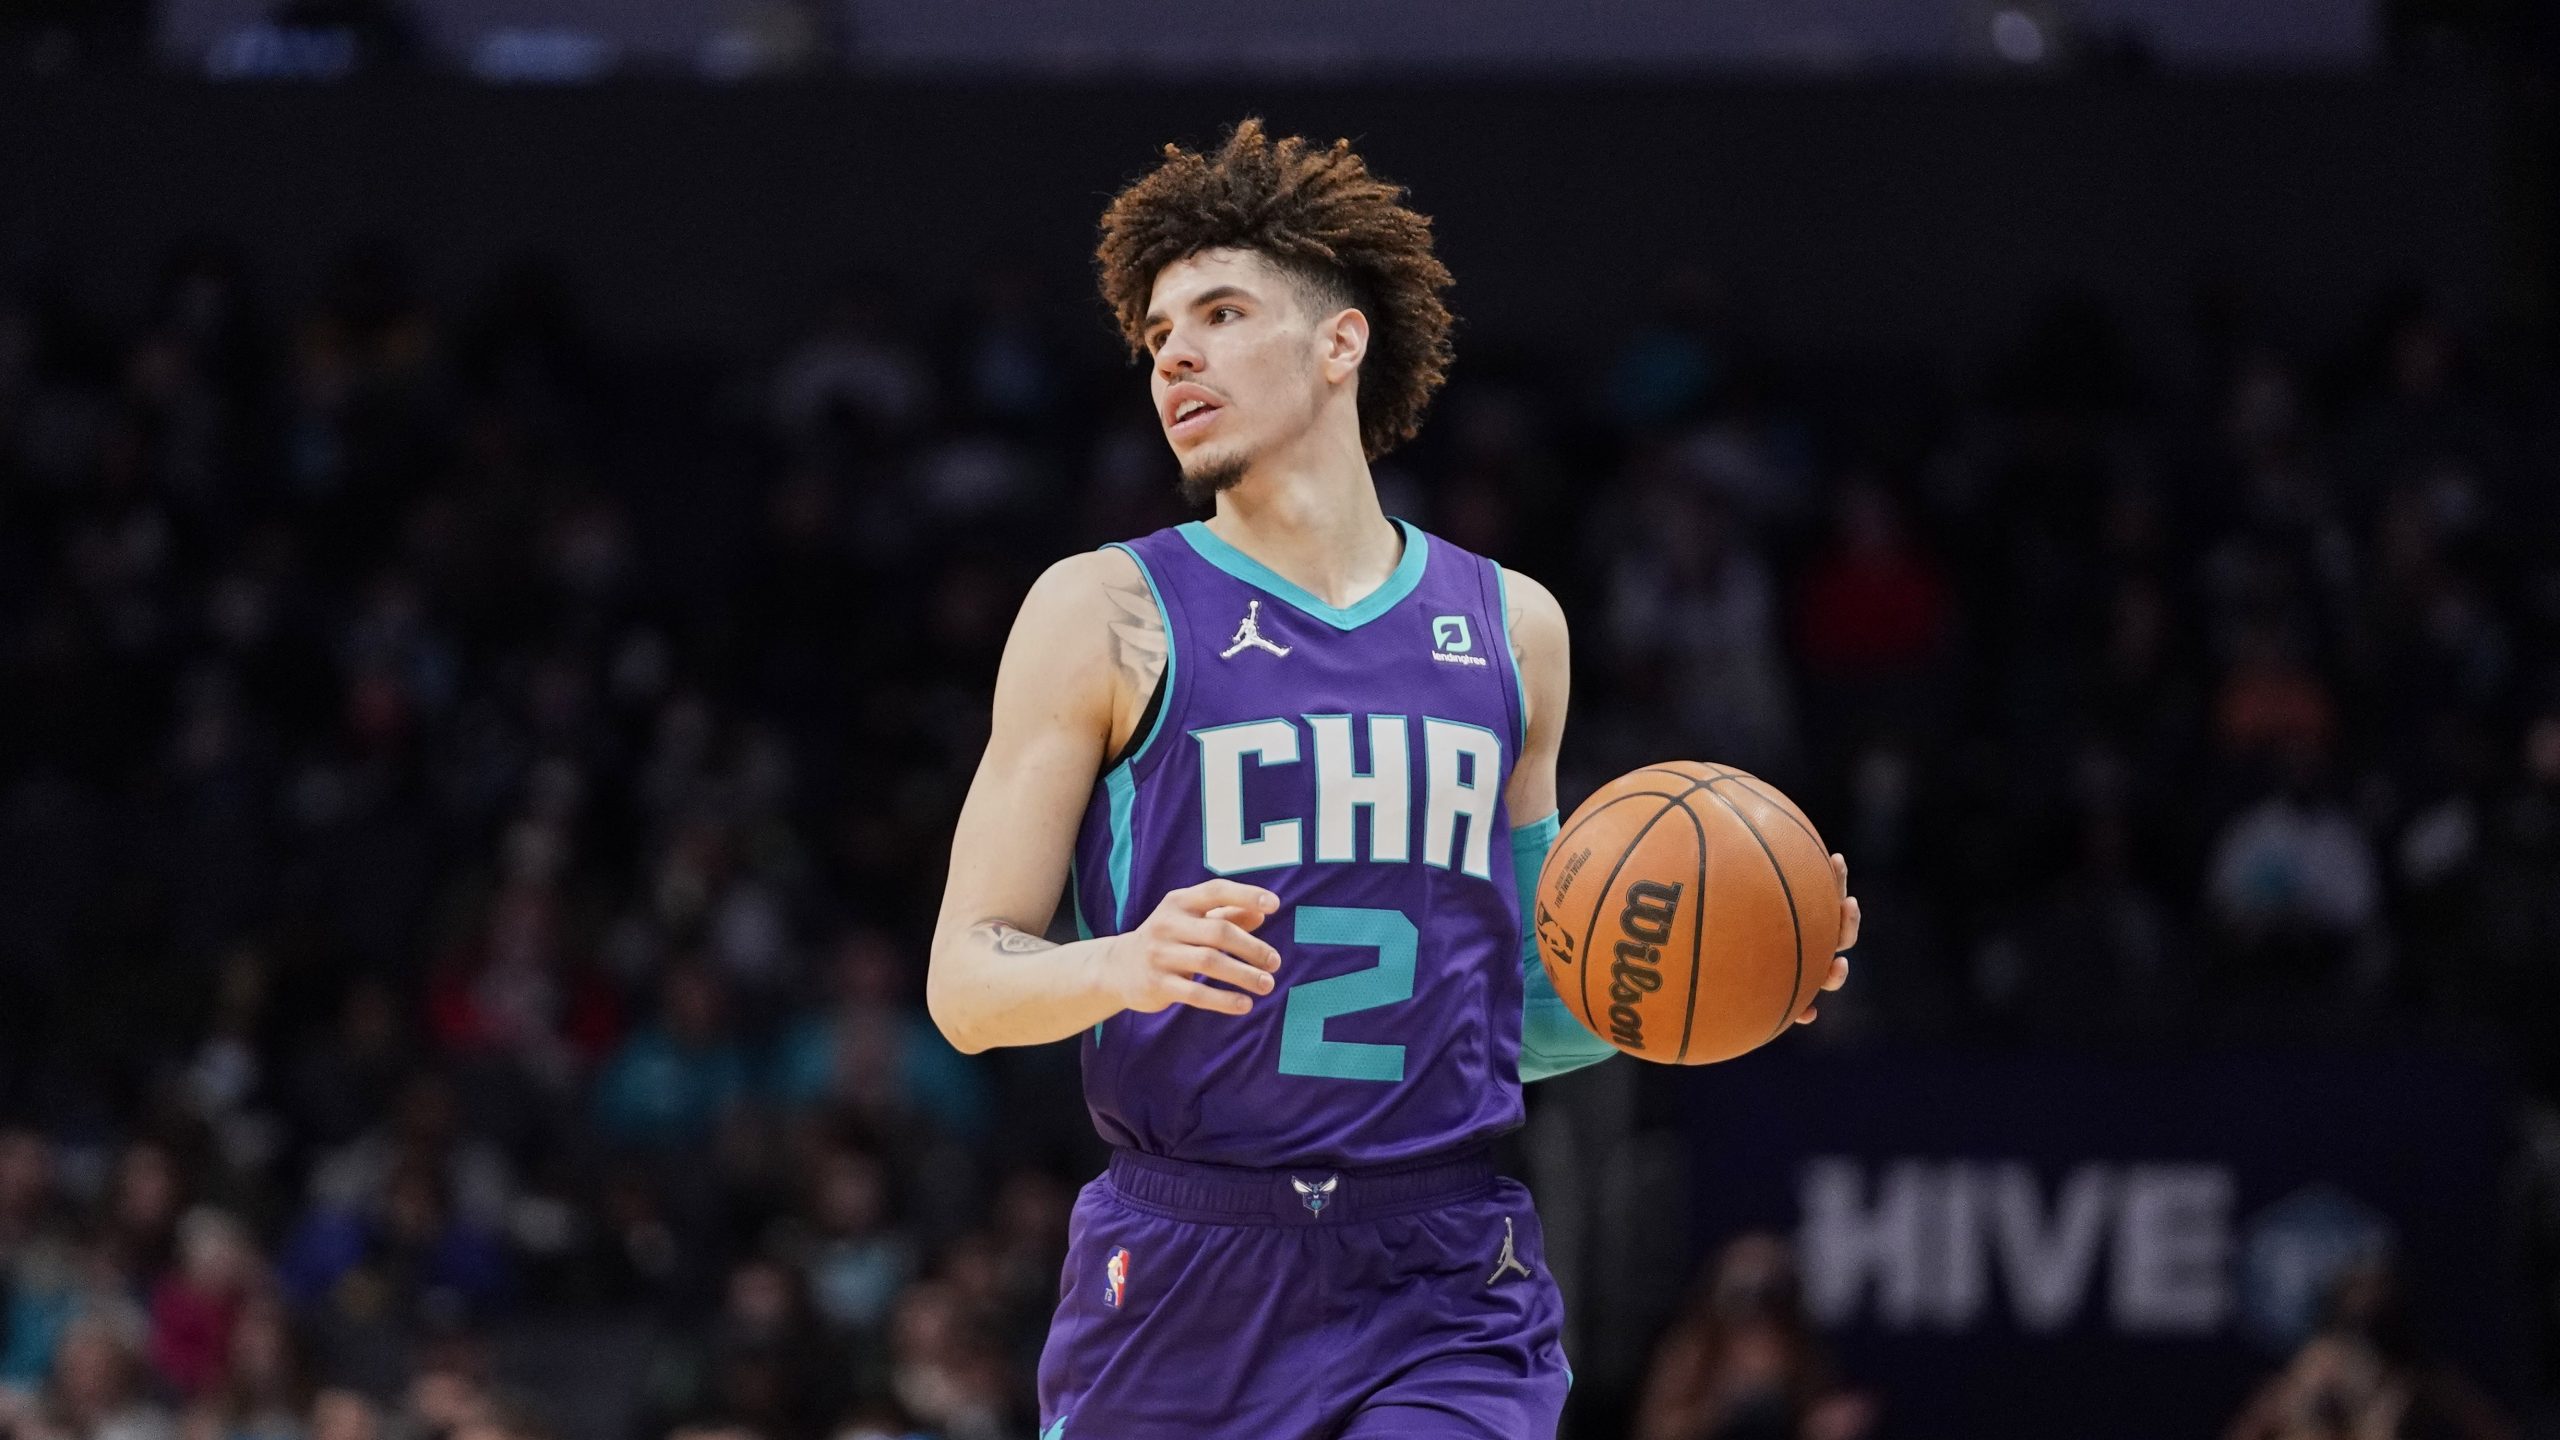 Charlotte Hornets guard LaMelo Ball (2) brings the ball upcourt during an NBA basketball game against the Los Angeles Clippers Sunday, Jan. 30, 2022, in Charlotte, N.C.